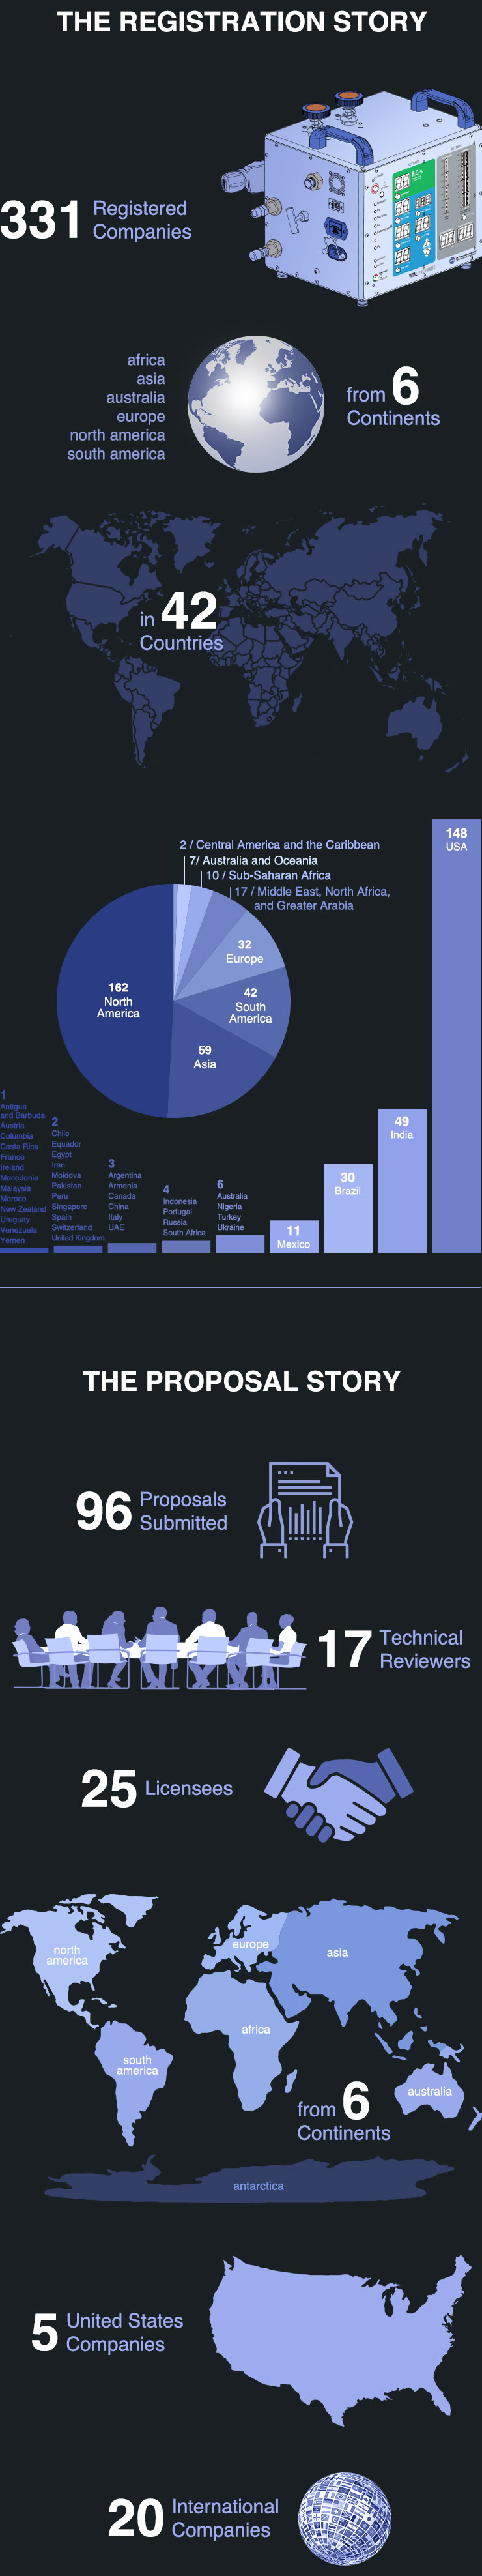 Infographic: The Registration Story. 331 Registered Companies from 6 Continents in 42 Countries. Infographic: The Proposal Story. 96 Proposals Submitted. 28 Licensees from 6 Continents. 8 United States Companies, 20 International Companies.